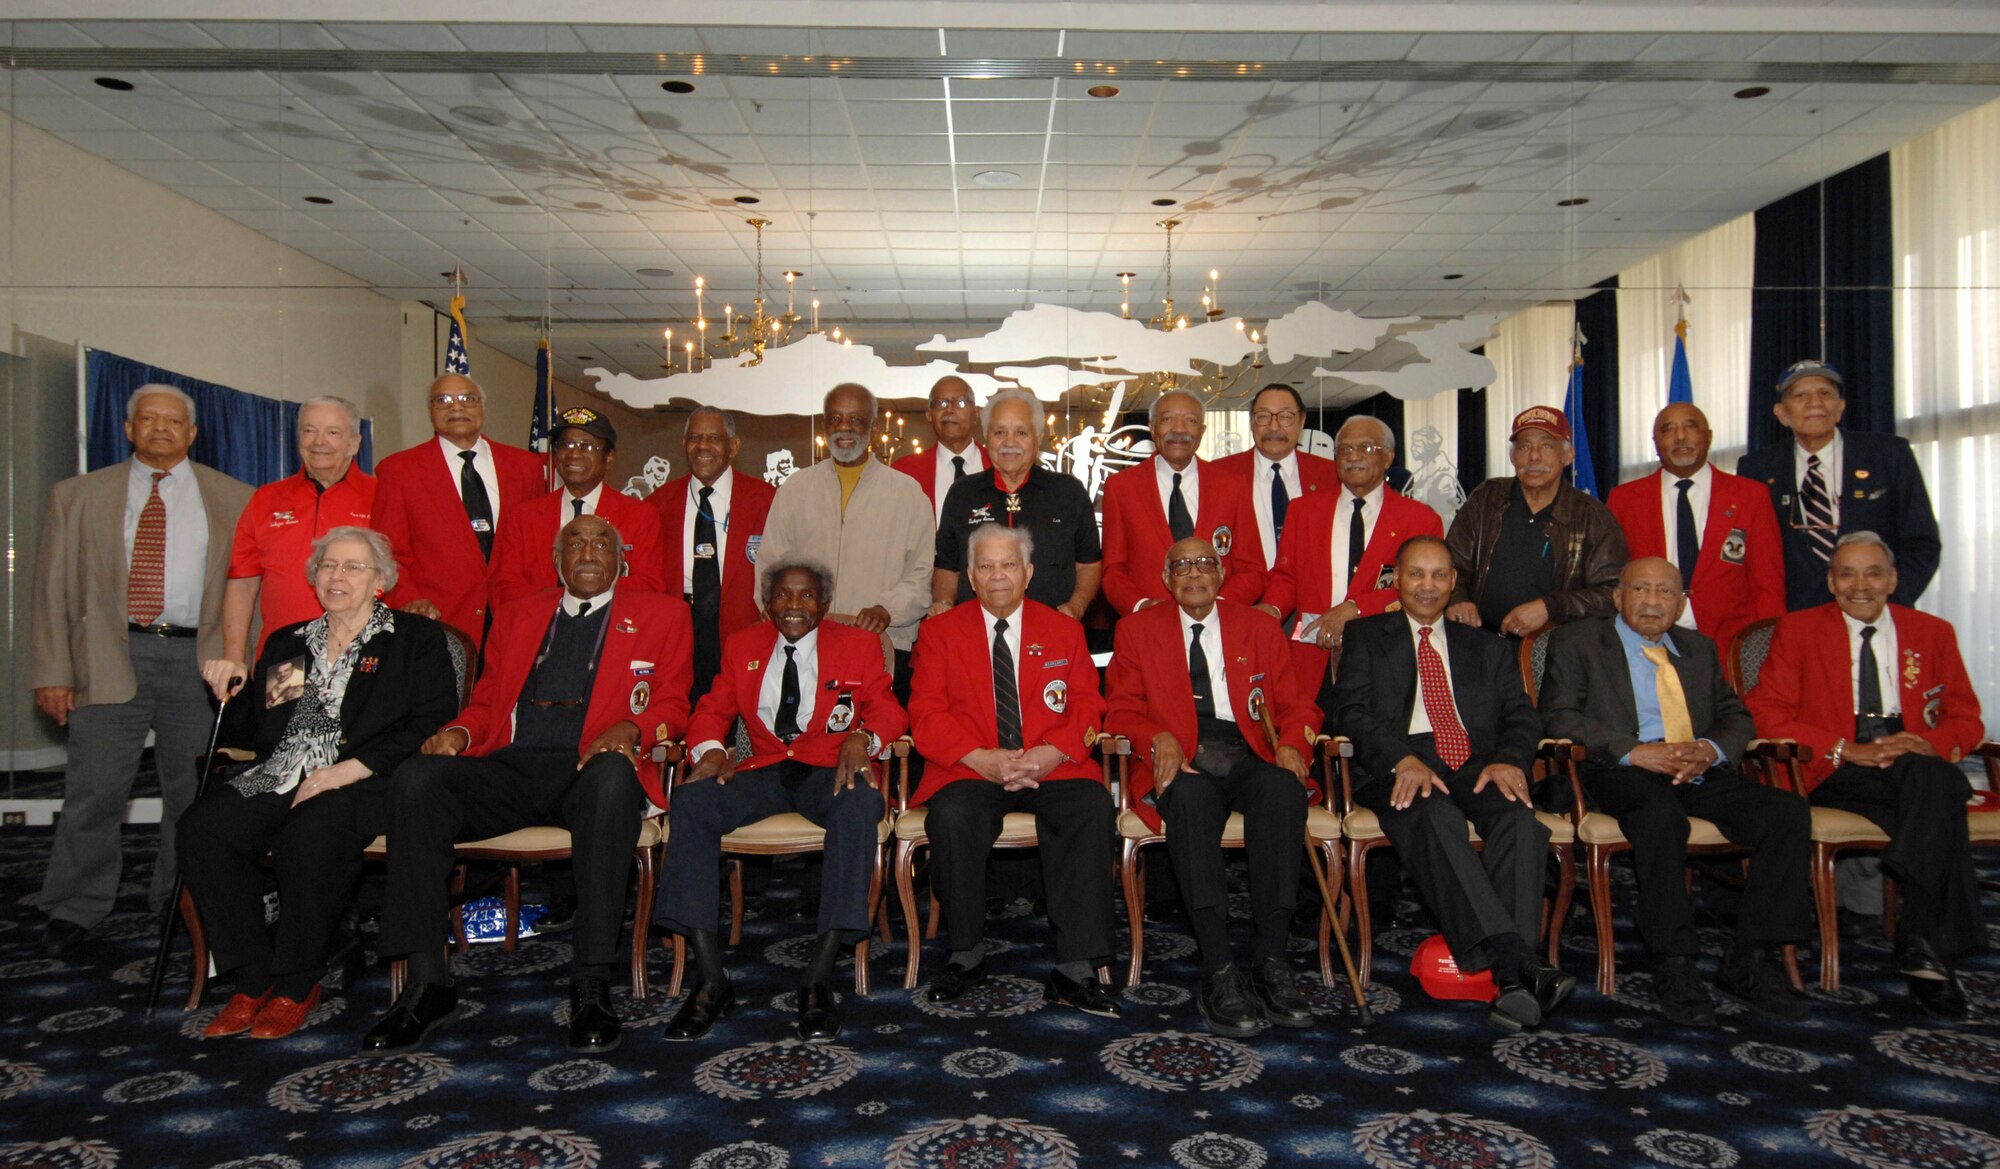 Original members of the Tuskegee Airmen pose for a photograph in the newly dedicated room named in their honor at the Bolling Air Force Base Club in Washington, D.C., March 28. The Tuskegee Airmen received the Congressional Gold Medal from President George W. Bush March 29, the highest civilian honor bestowed by Congress. (U.S. Air Force photo/Airman 1st Class Timothy Chacon)